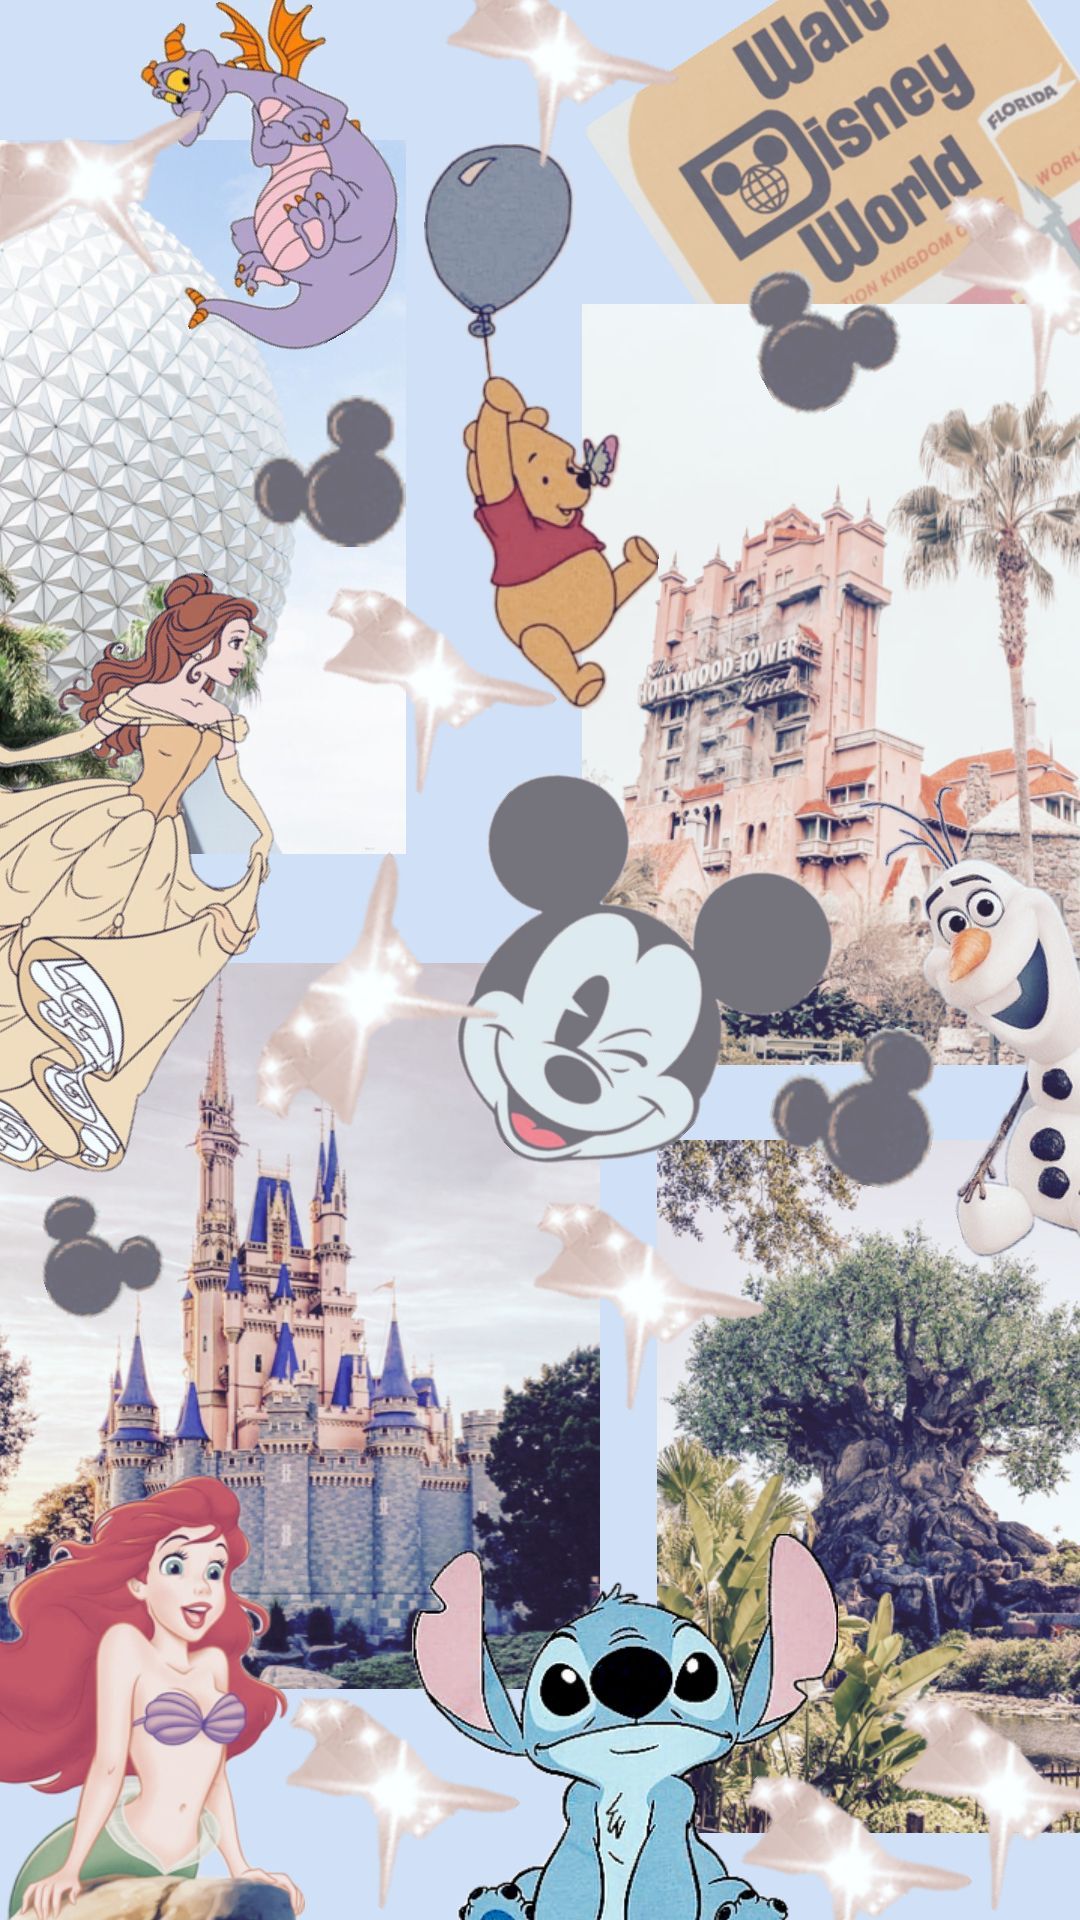 Walt Disney World wallpaper by me! Credit to the rightful owners of the pictures used. - Florida